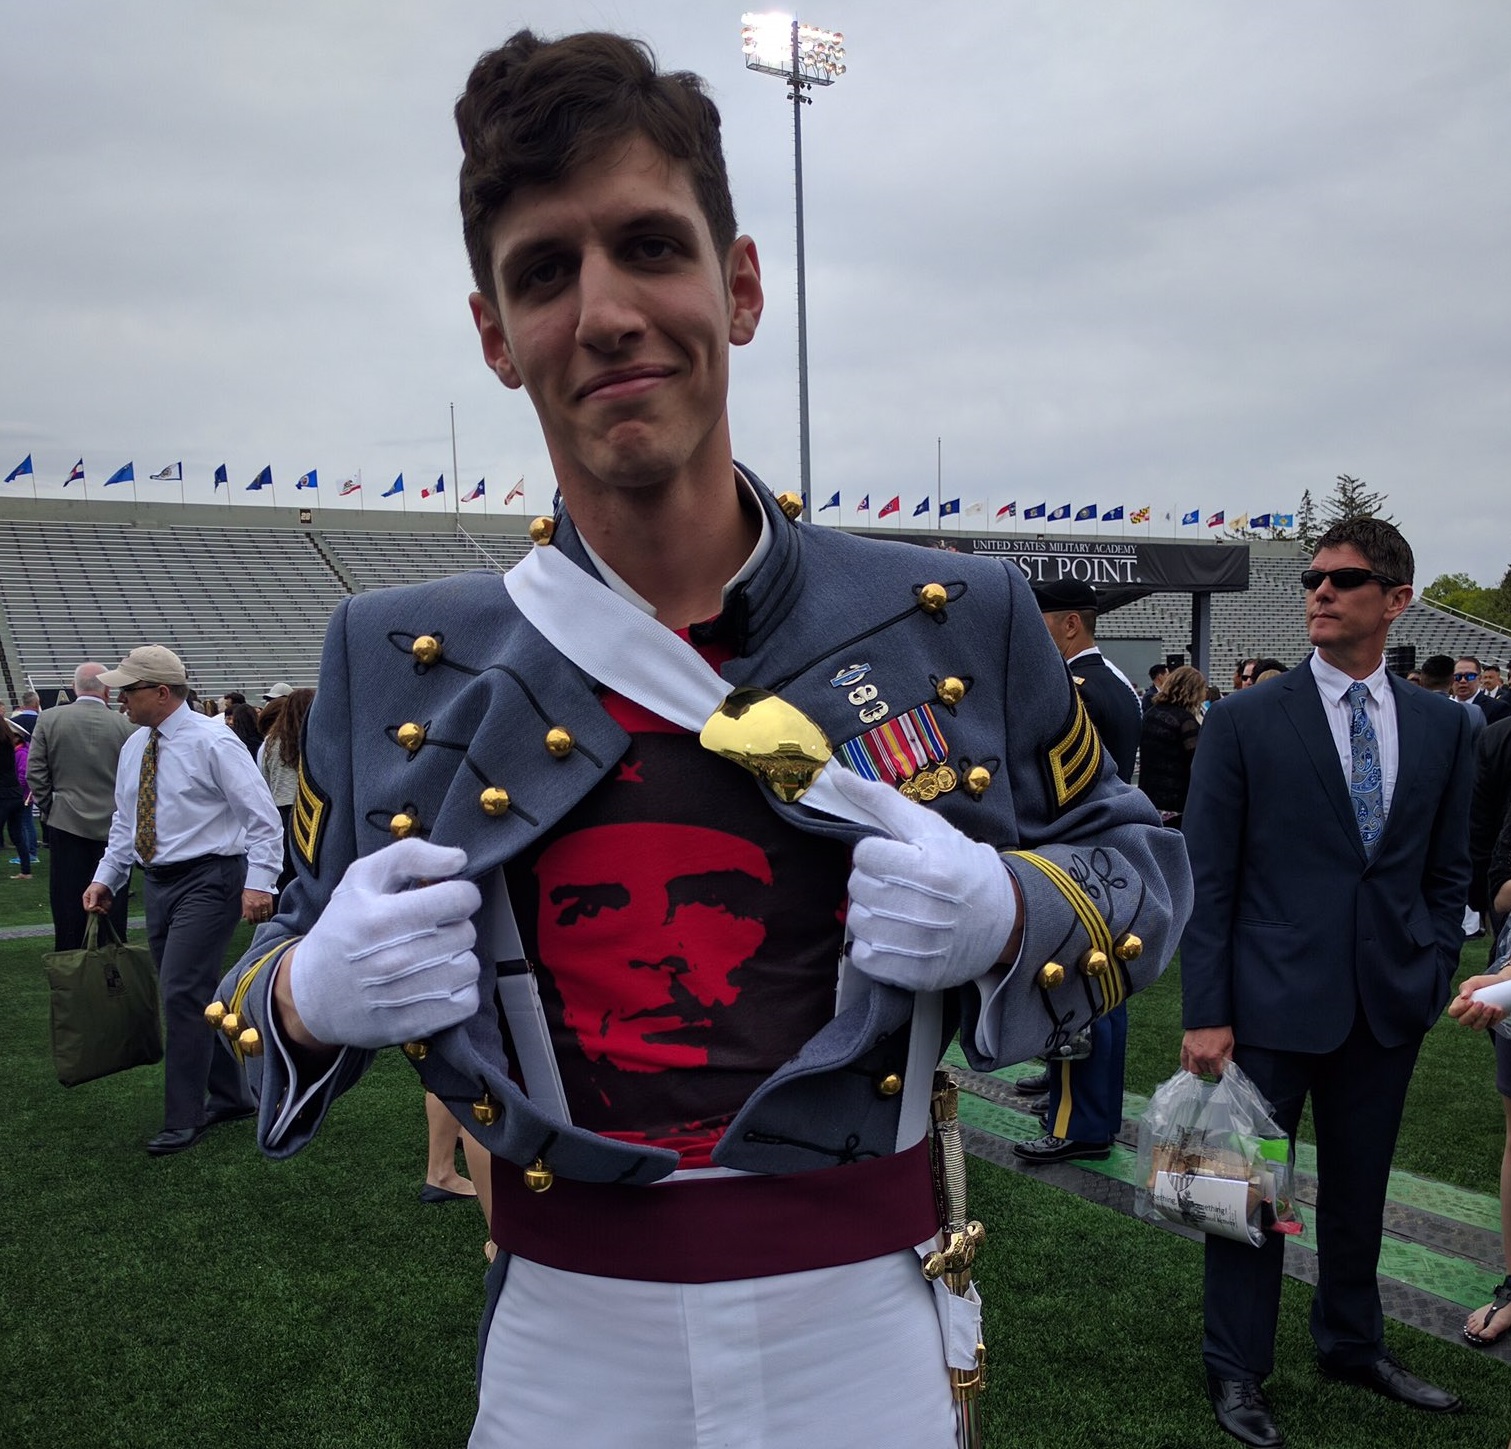 USA underviser Daddy West Point responds to tweets of cadet with Che Guevara tee under uniform